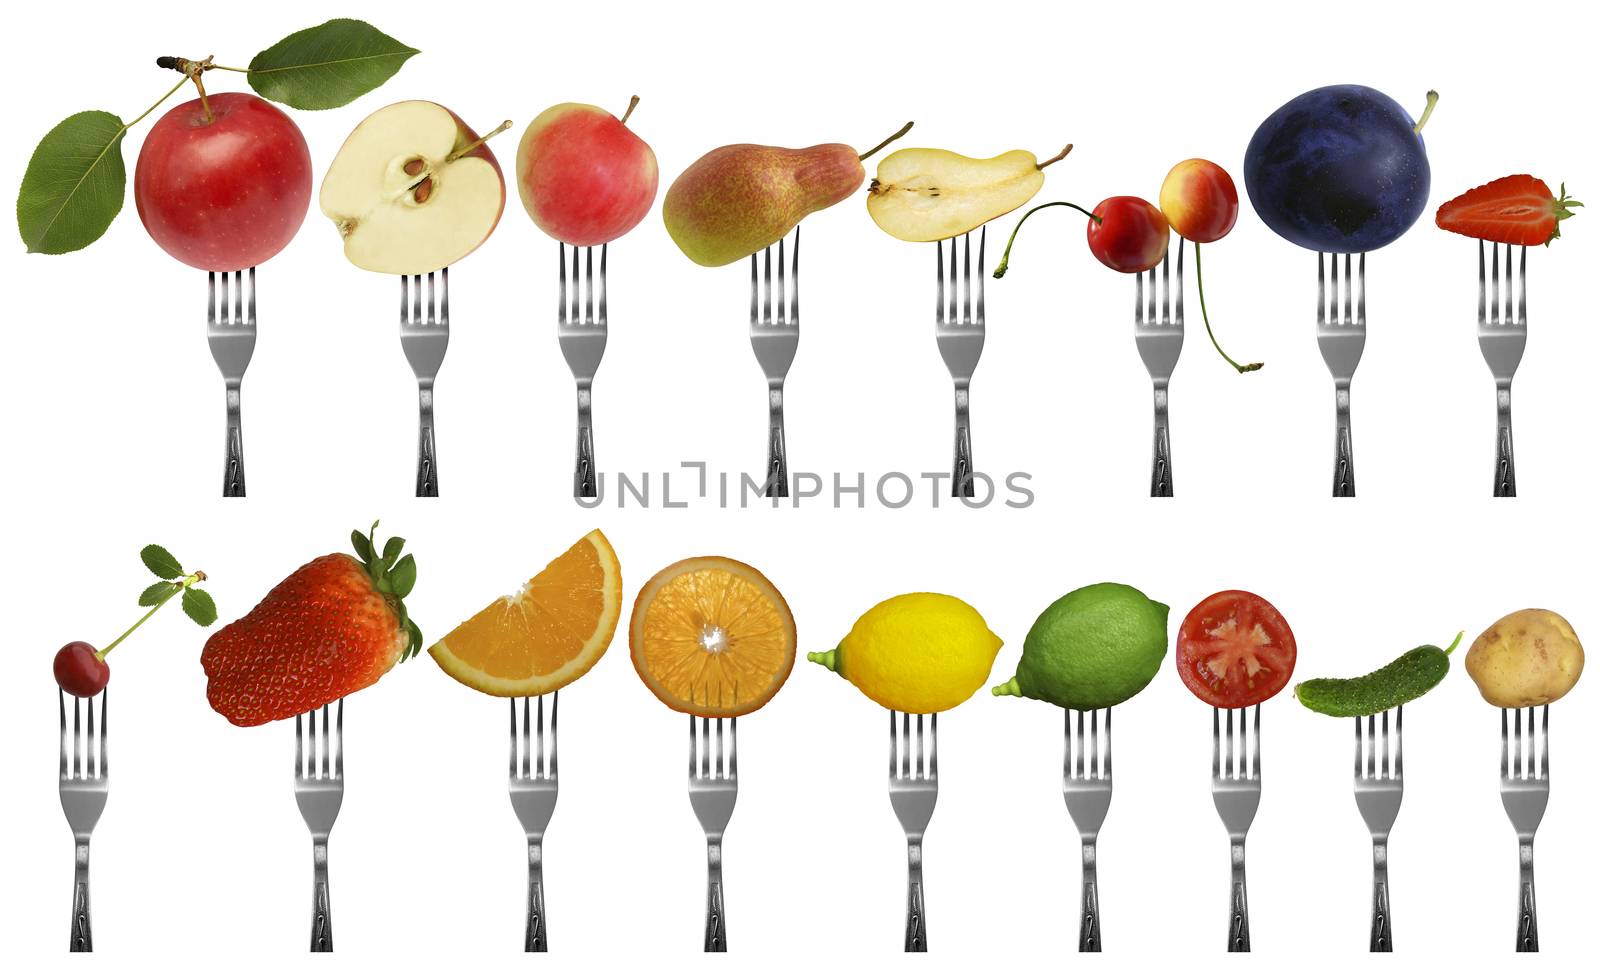 Fruits and vegetables on forks isolated on a white background.